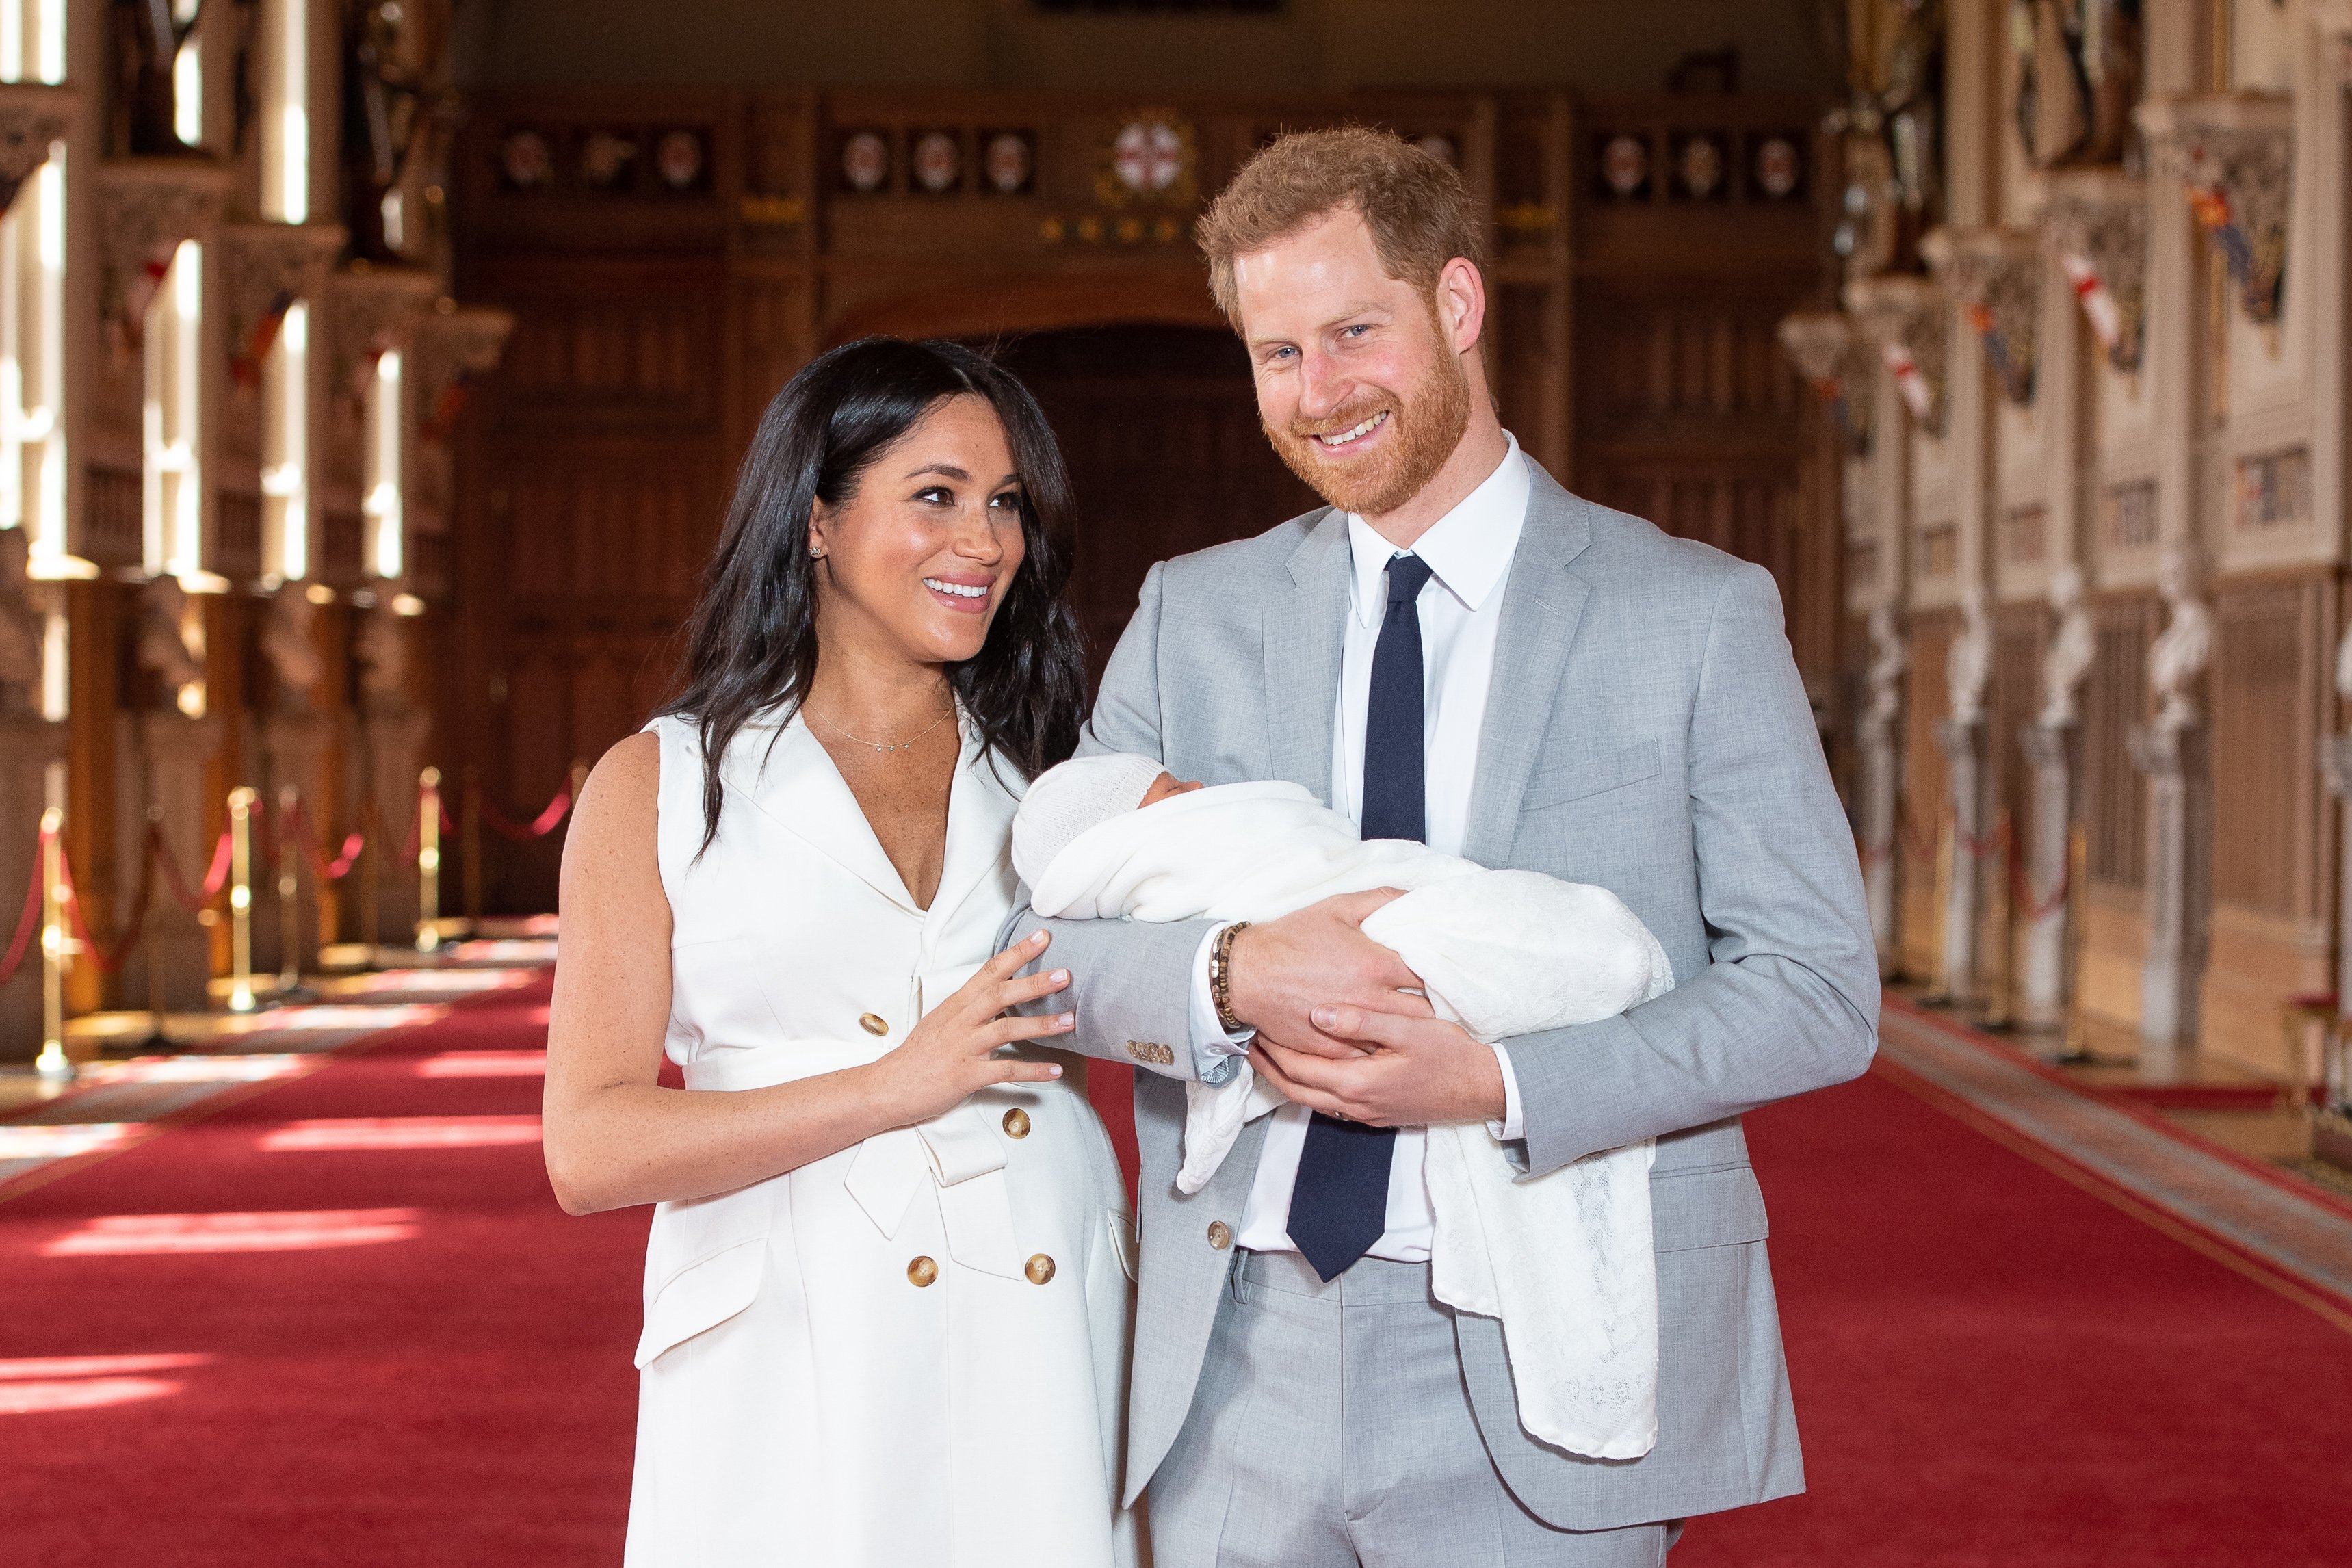 Prince Harry, Duke of Sussex, Meghan, Duchess of Sussex, and their son Archie at Windsor Castle on May 8, 2019 | Photo: Getty Images